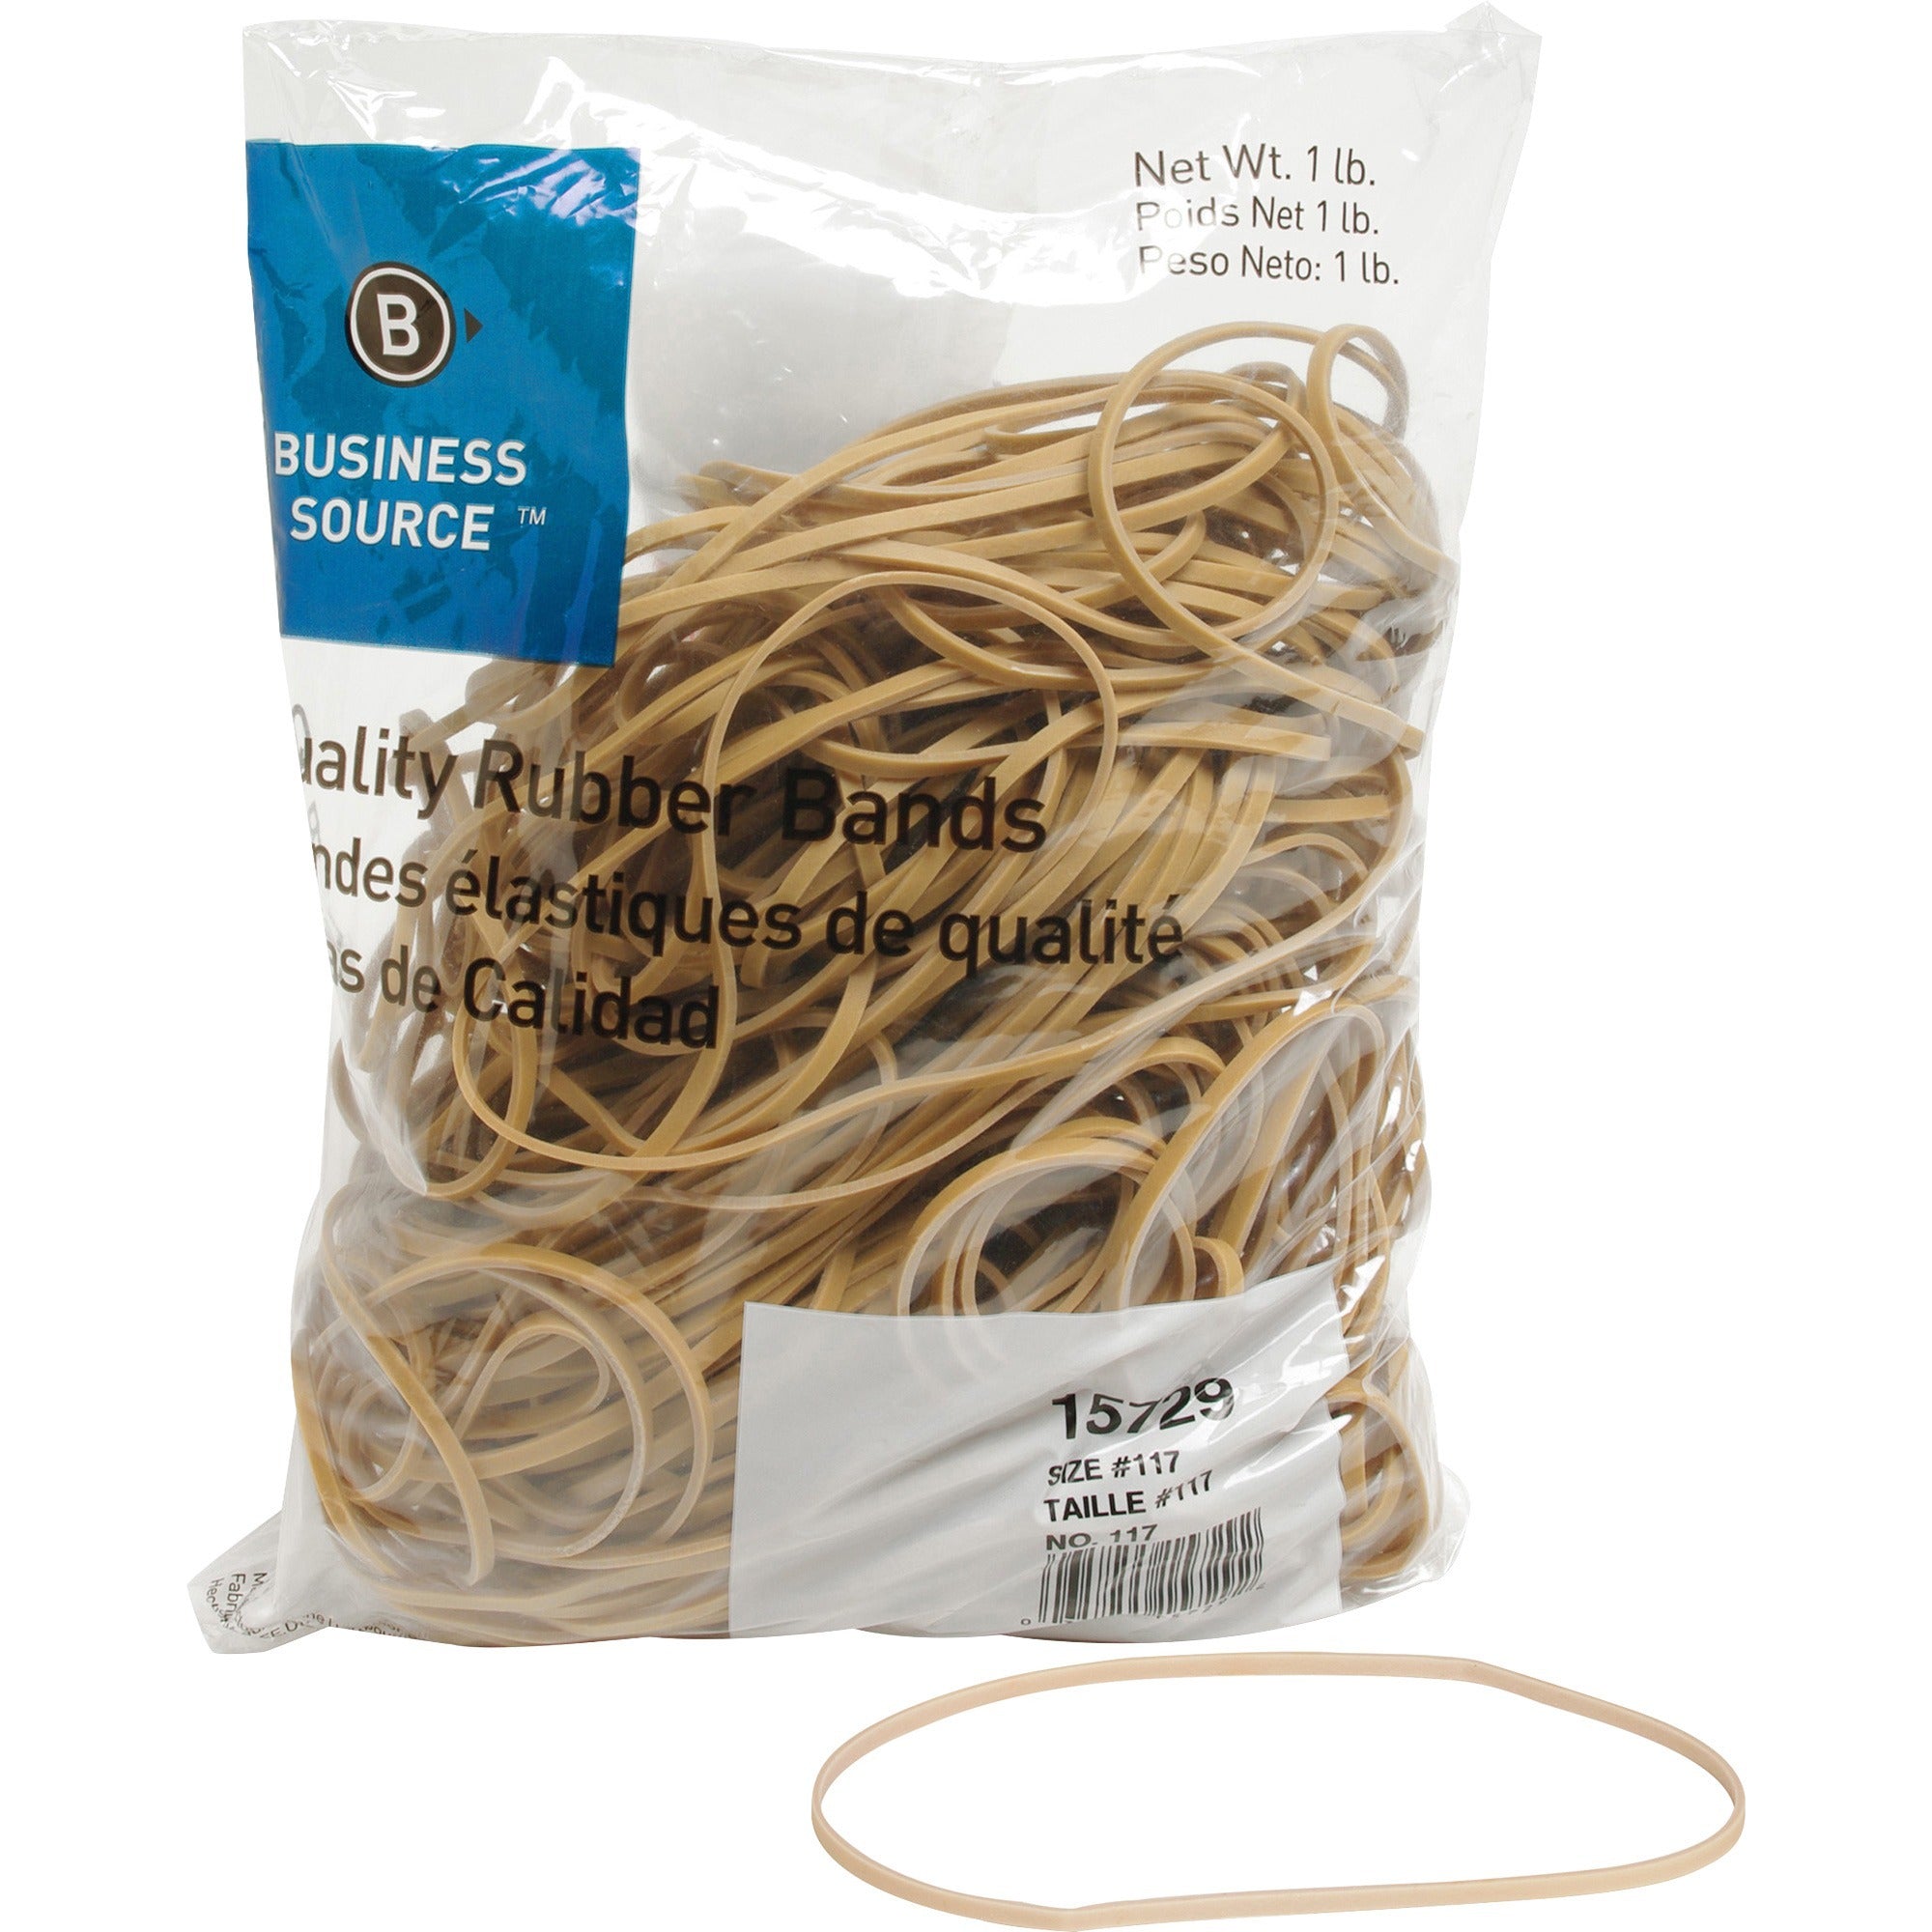 Business Source Quality Rubber Bands - Size: #117B - 7" Length x 0.1" Width - Sustainable - 200 / Pack - Rubber - Crepe - 